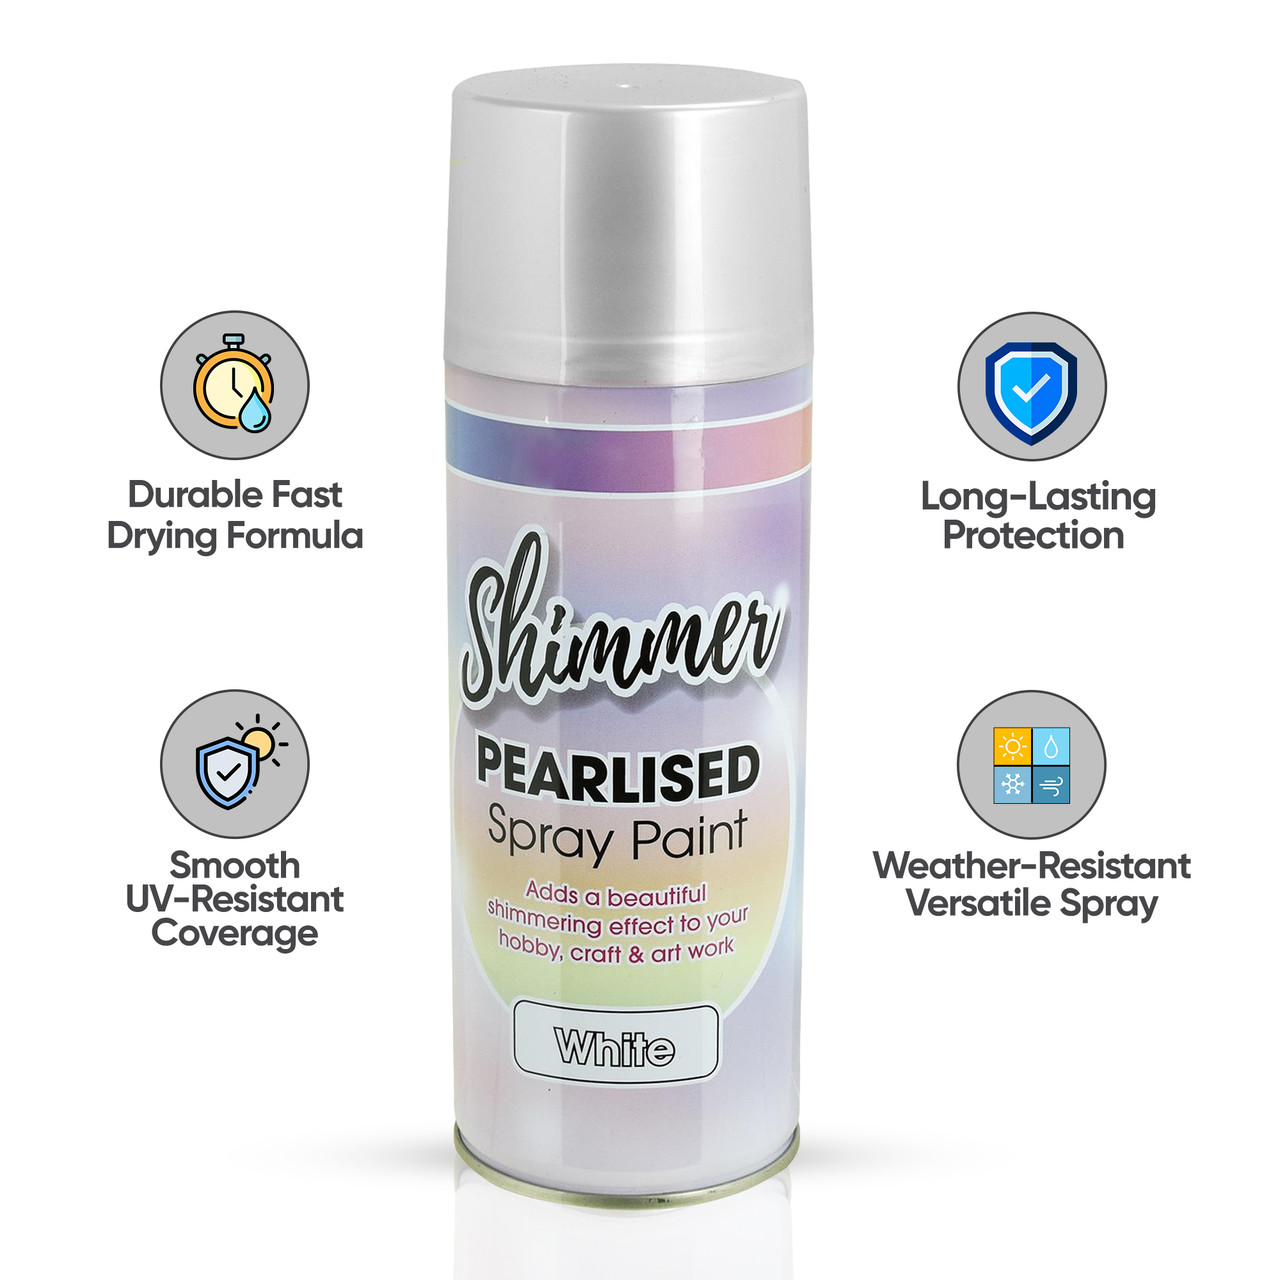 PEARLISED SHIMMER WHITE,SILVER,LILAC & PINK SPRAY PAINT HOBBY CRAFTS & ART  400ML